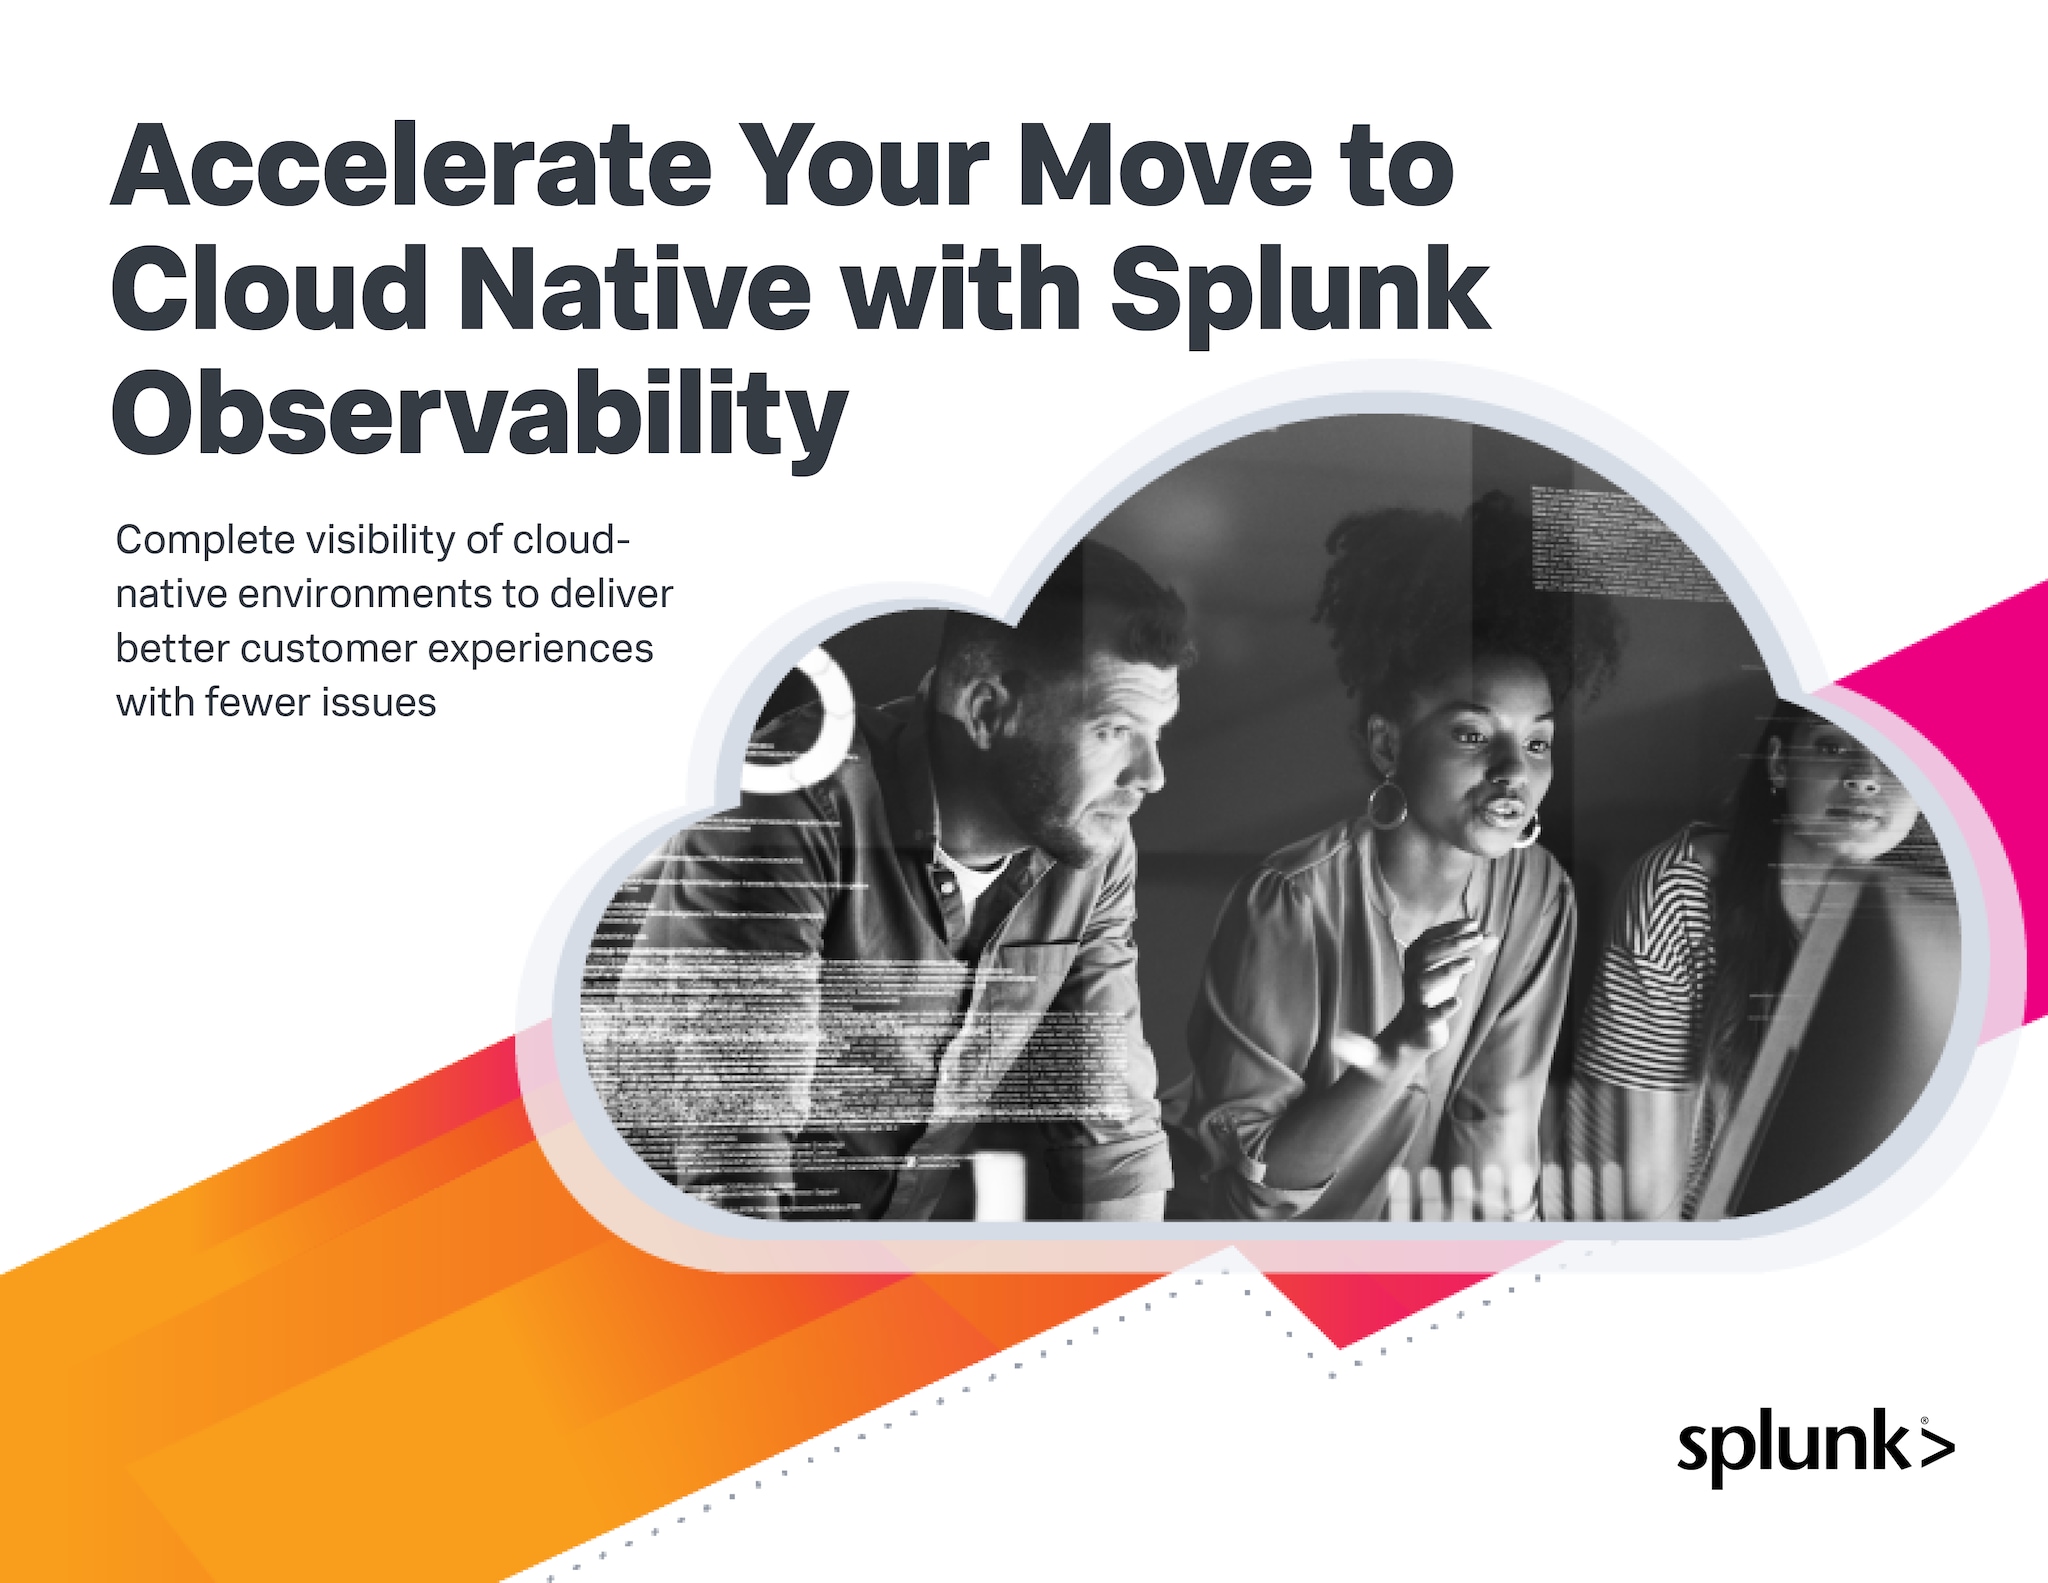 Accelerate Your Move to Cloud Native with Splunk Observability